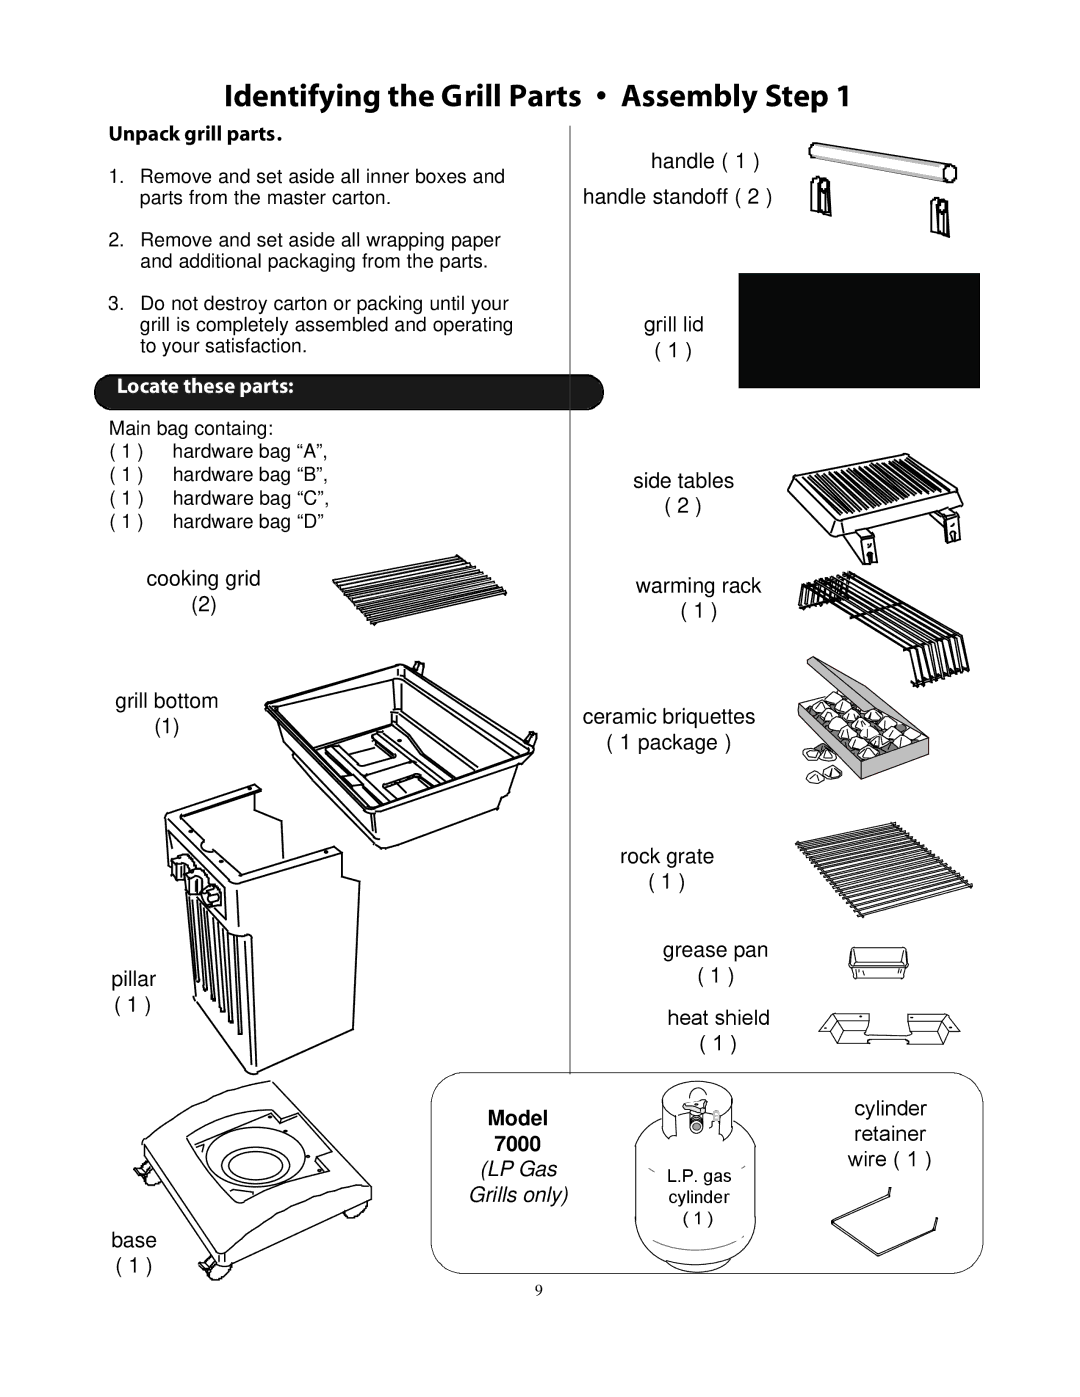 CFM Corporation 7000 owner manual Identifying the Grill Parts Assembly Step, Unpack grill parts 